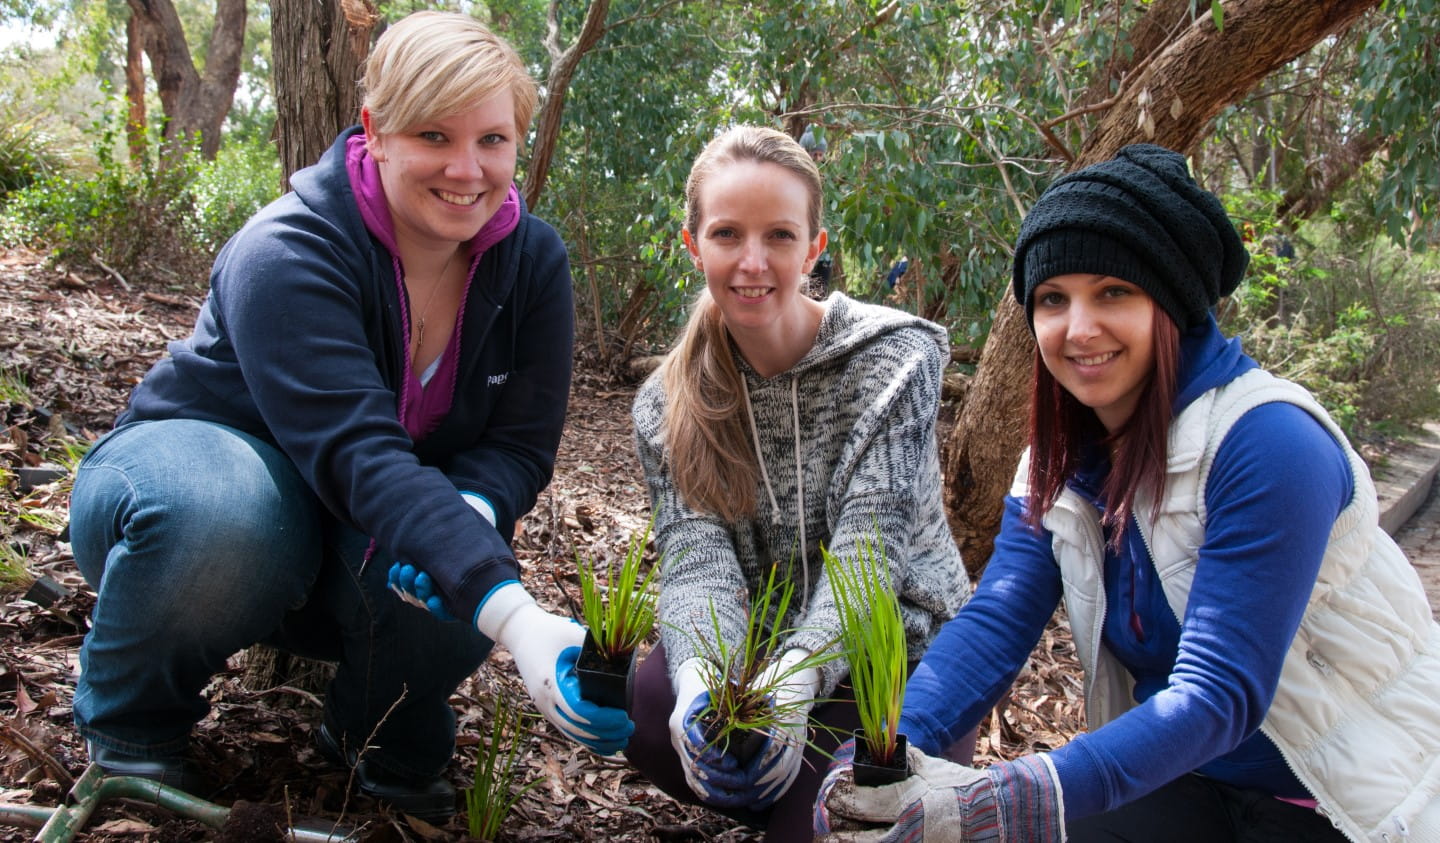 A group of volunteers planting trees in a park.